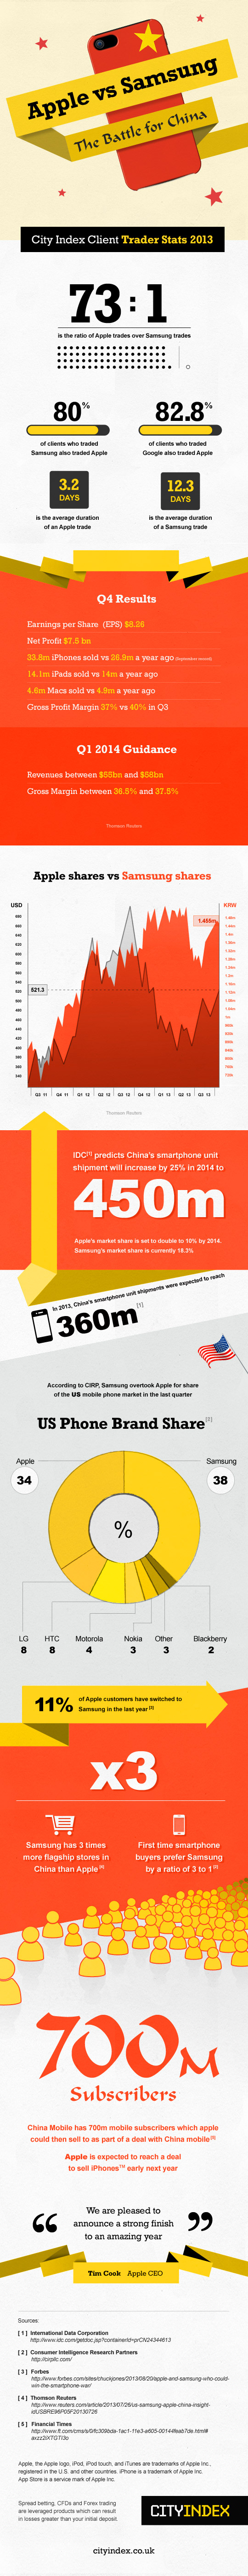 Apple vs. Samsung - The Battle for China [Infographic]